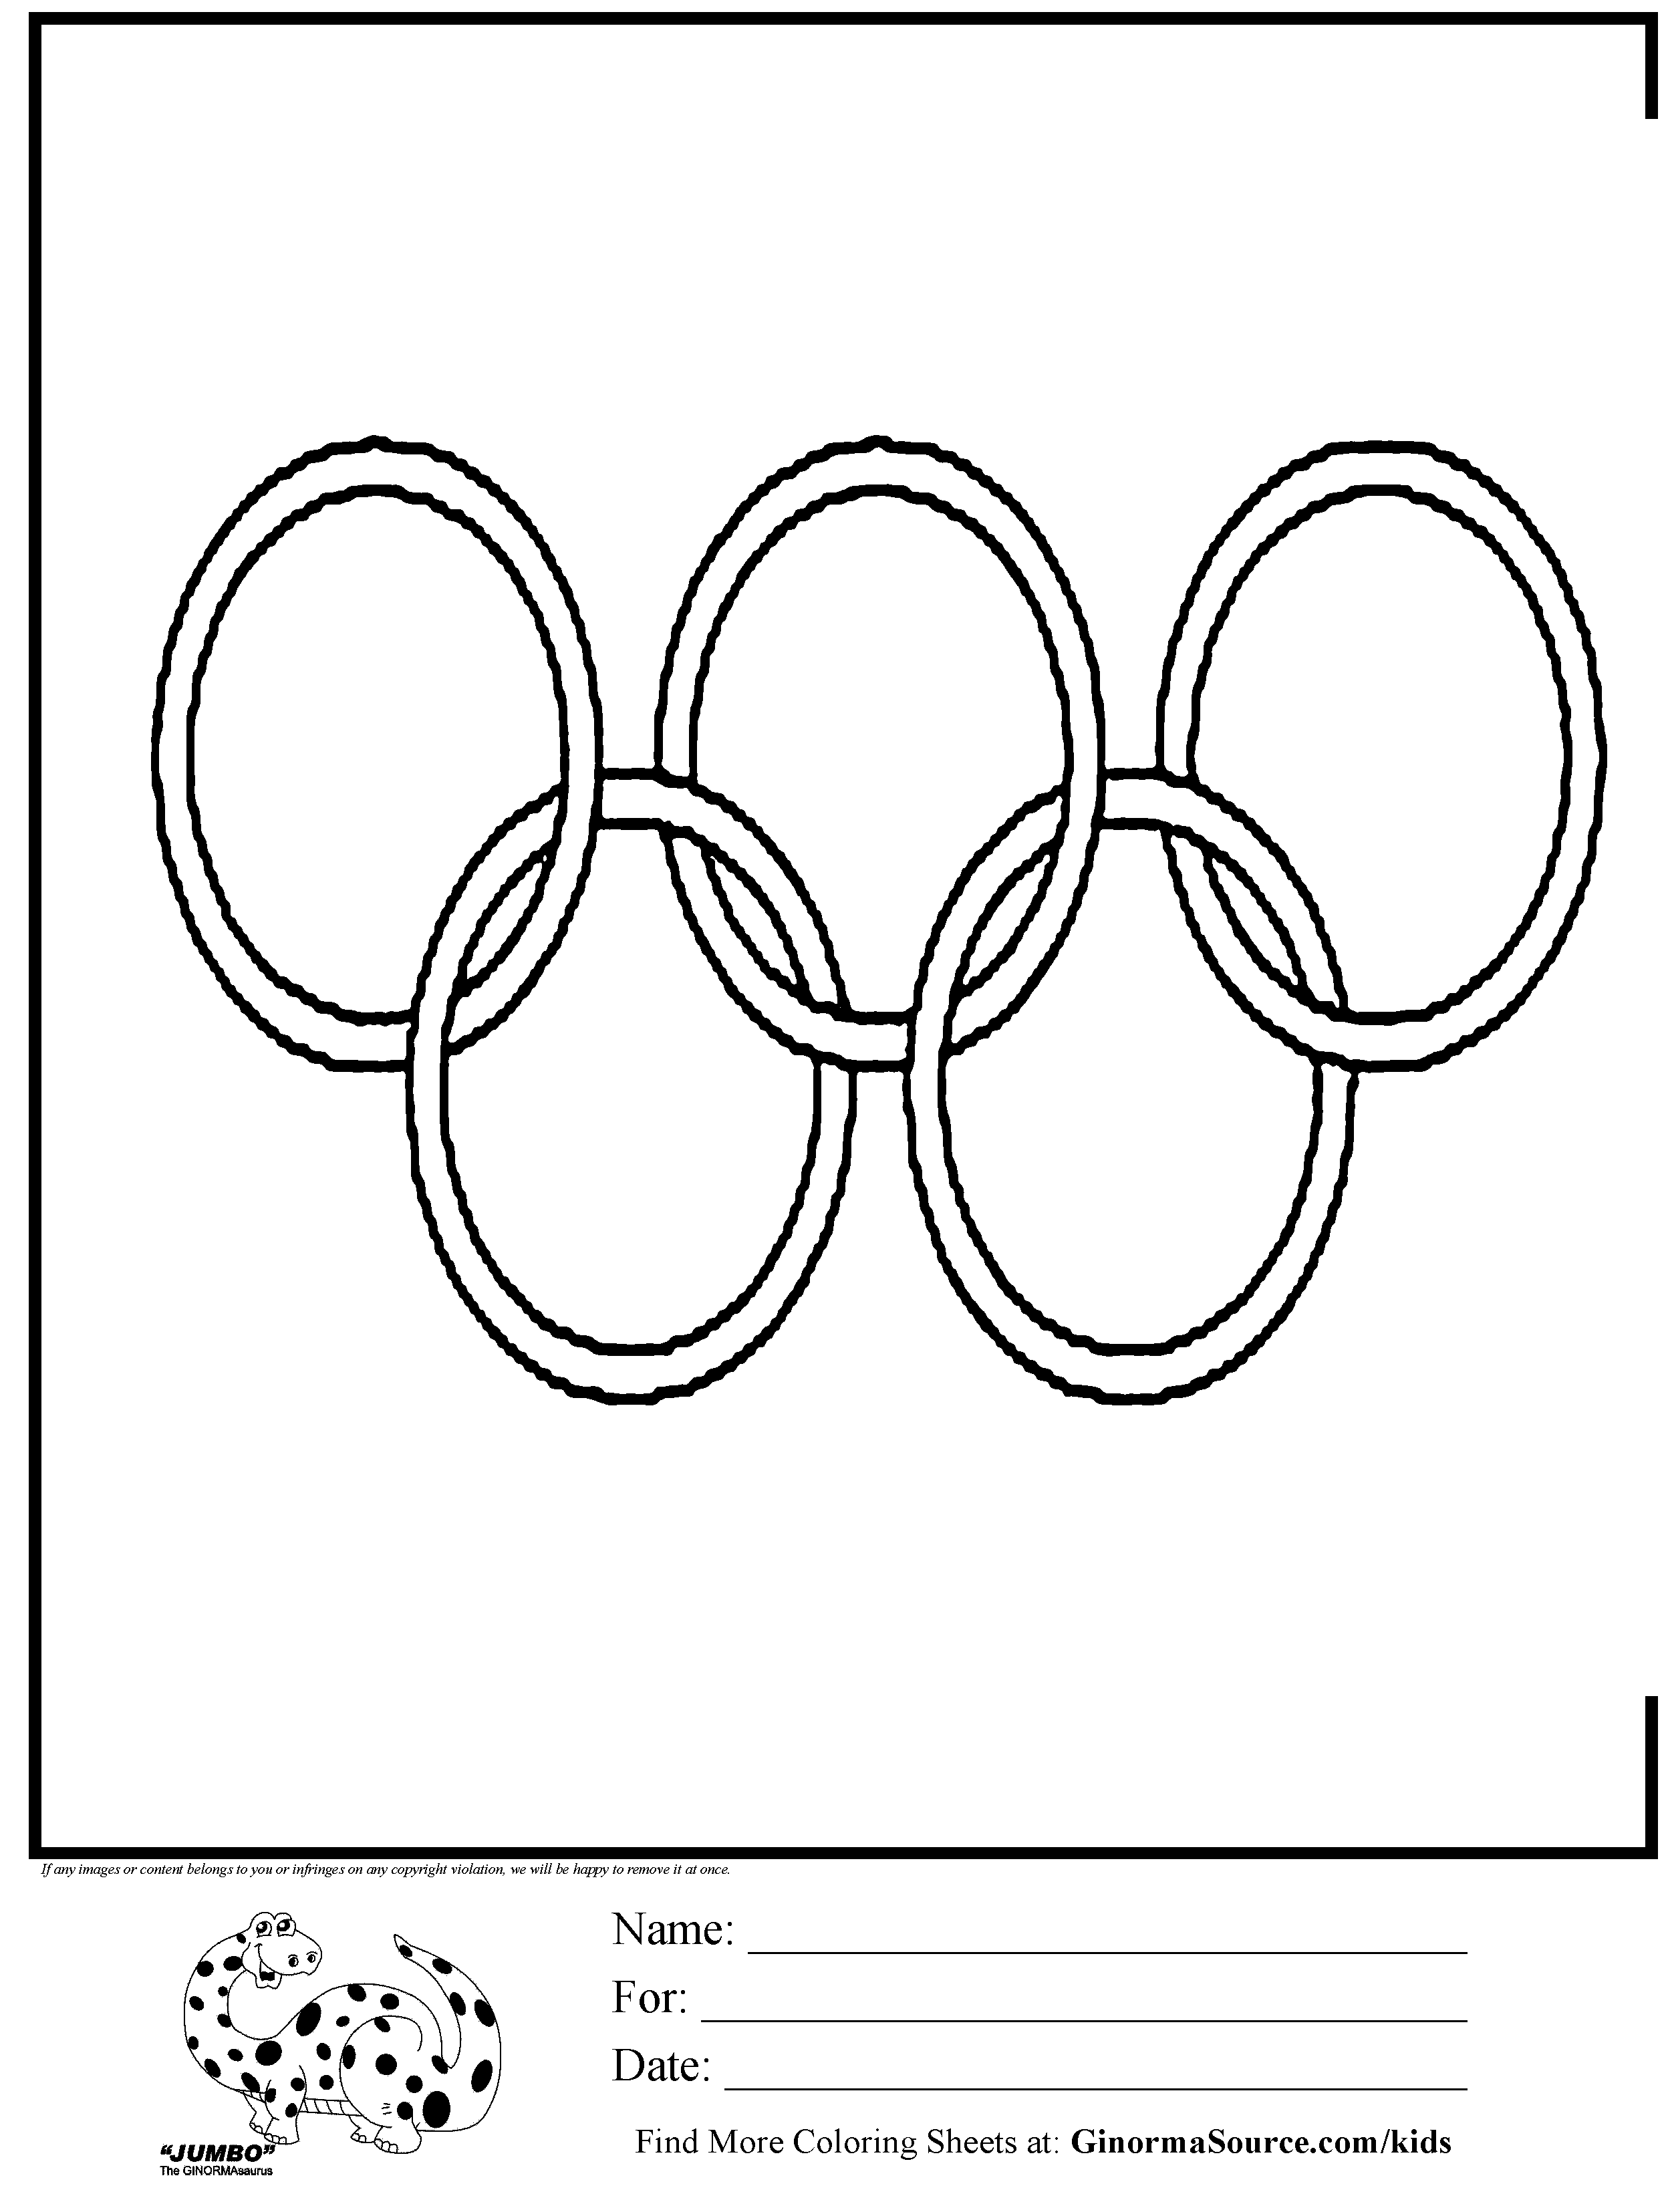 Olympic Rings Logo Coloring Page